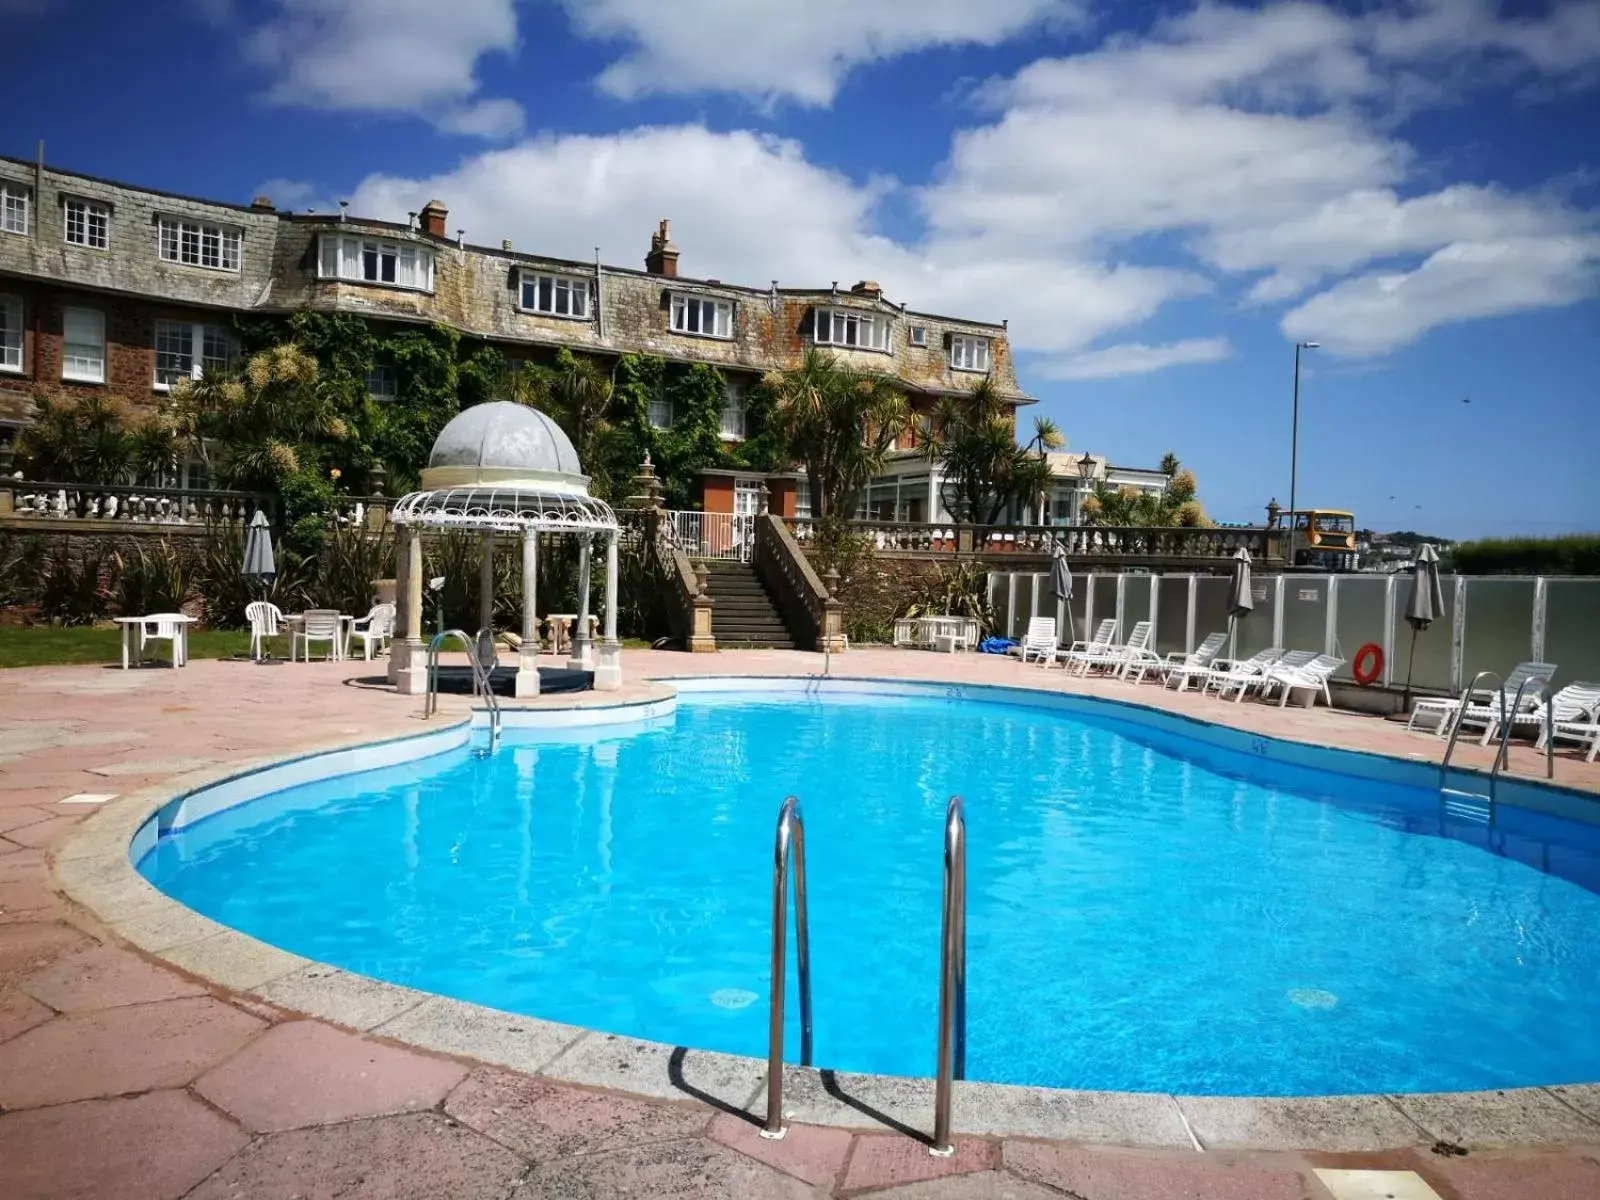 Swimming pool in Livermead House Hotel